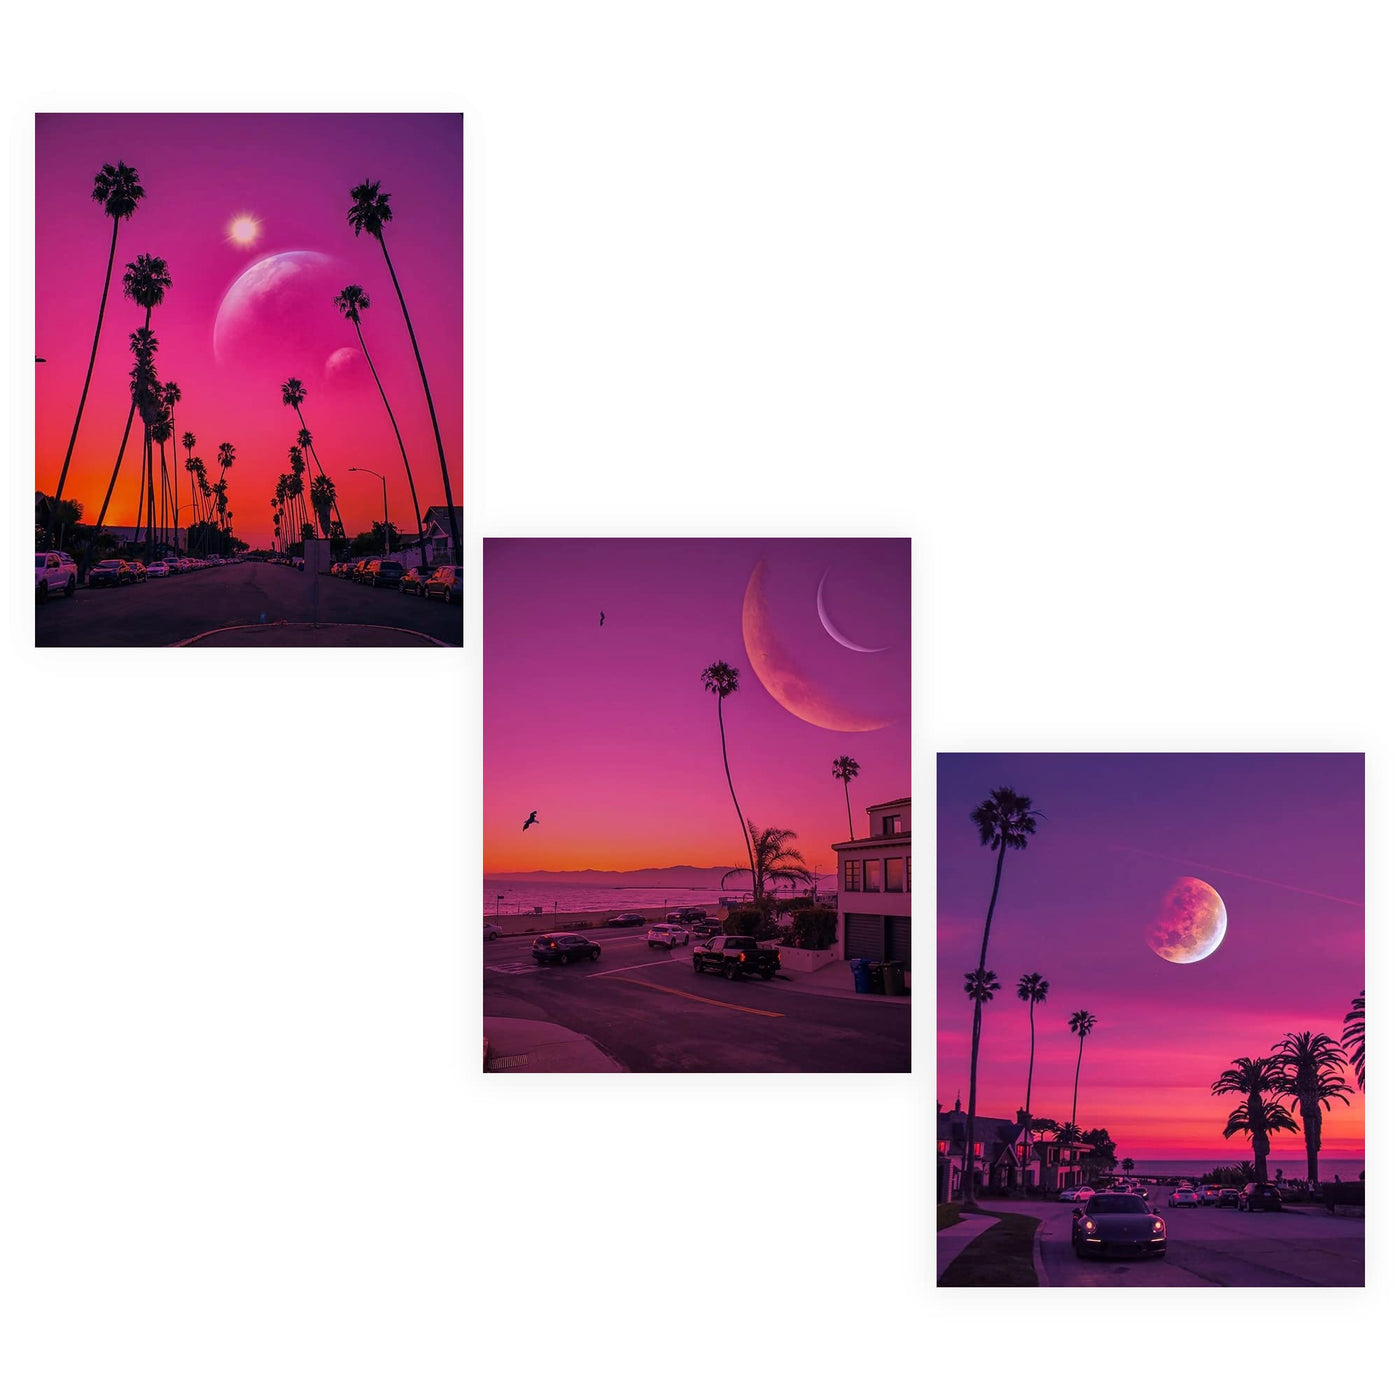 Purple Moons in Paradise Trio- 3 Image Set- Tropical Wall Art Prints- 8 x 10"s- Ready to Frame. Perfect Island Beach Pictures for Home-Beach House-Ocean Themed Decor. Great Gift for Beach Lovers!